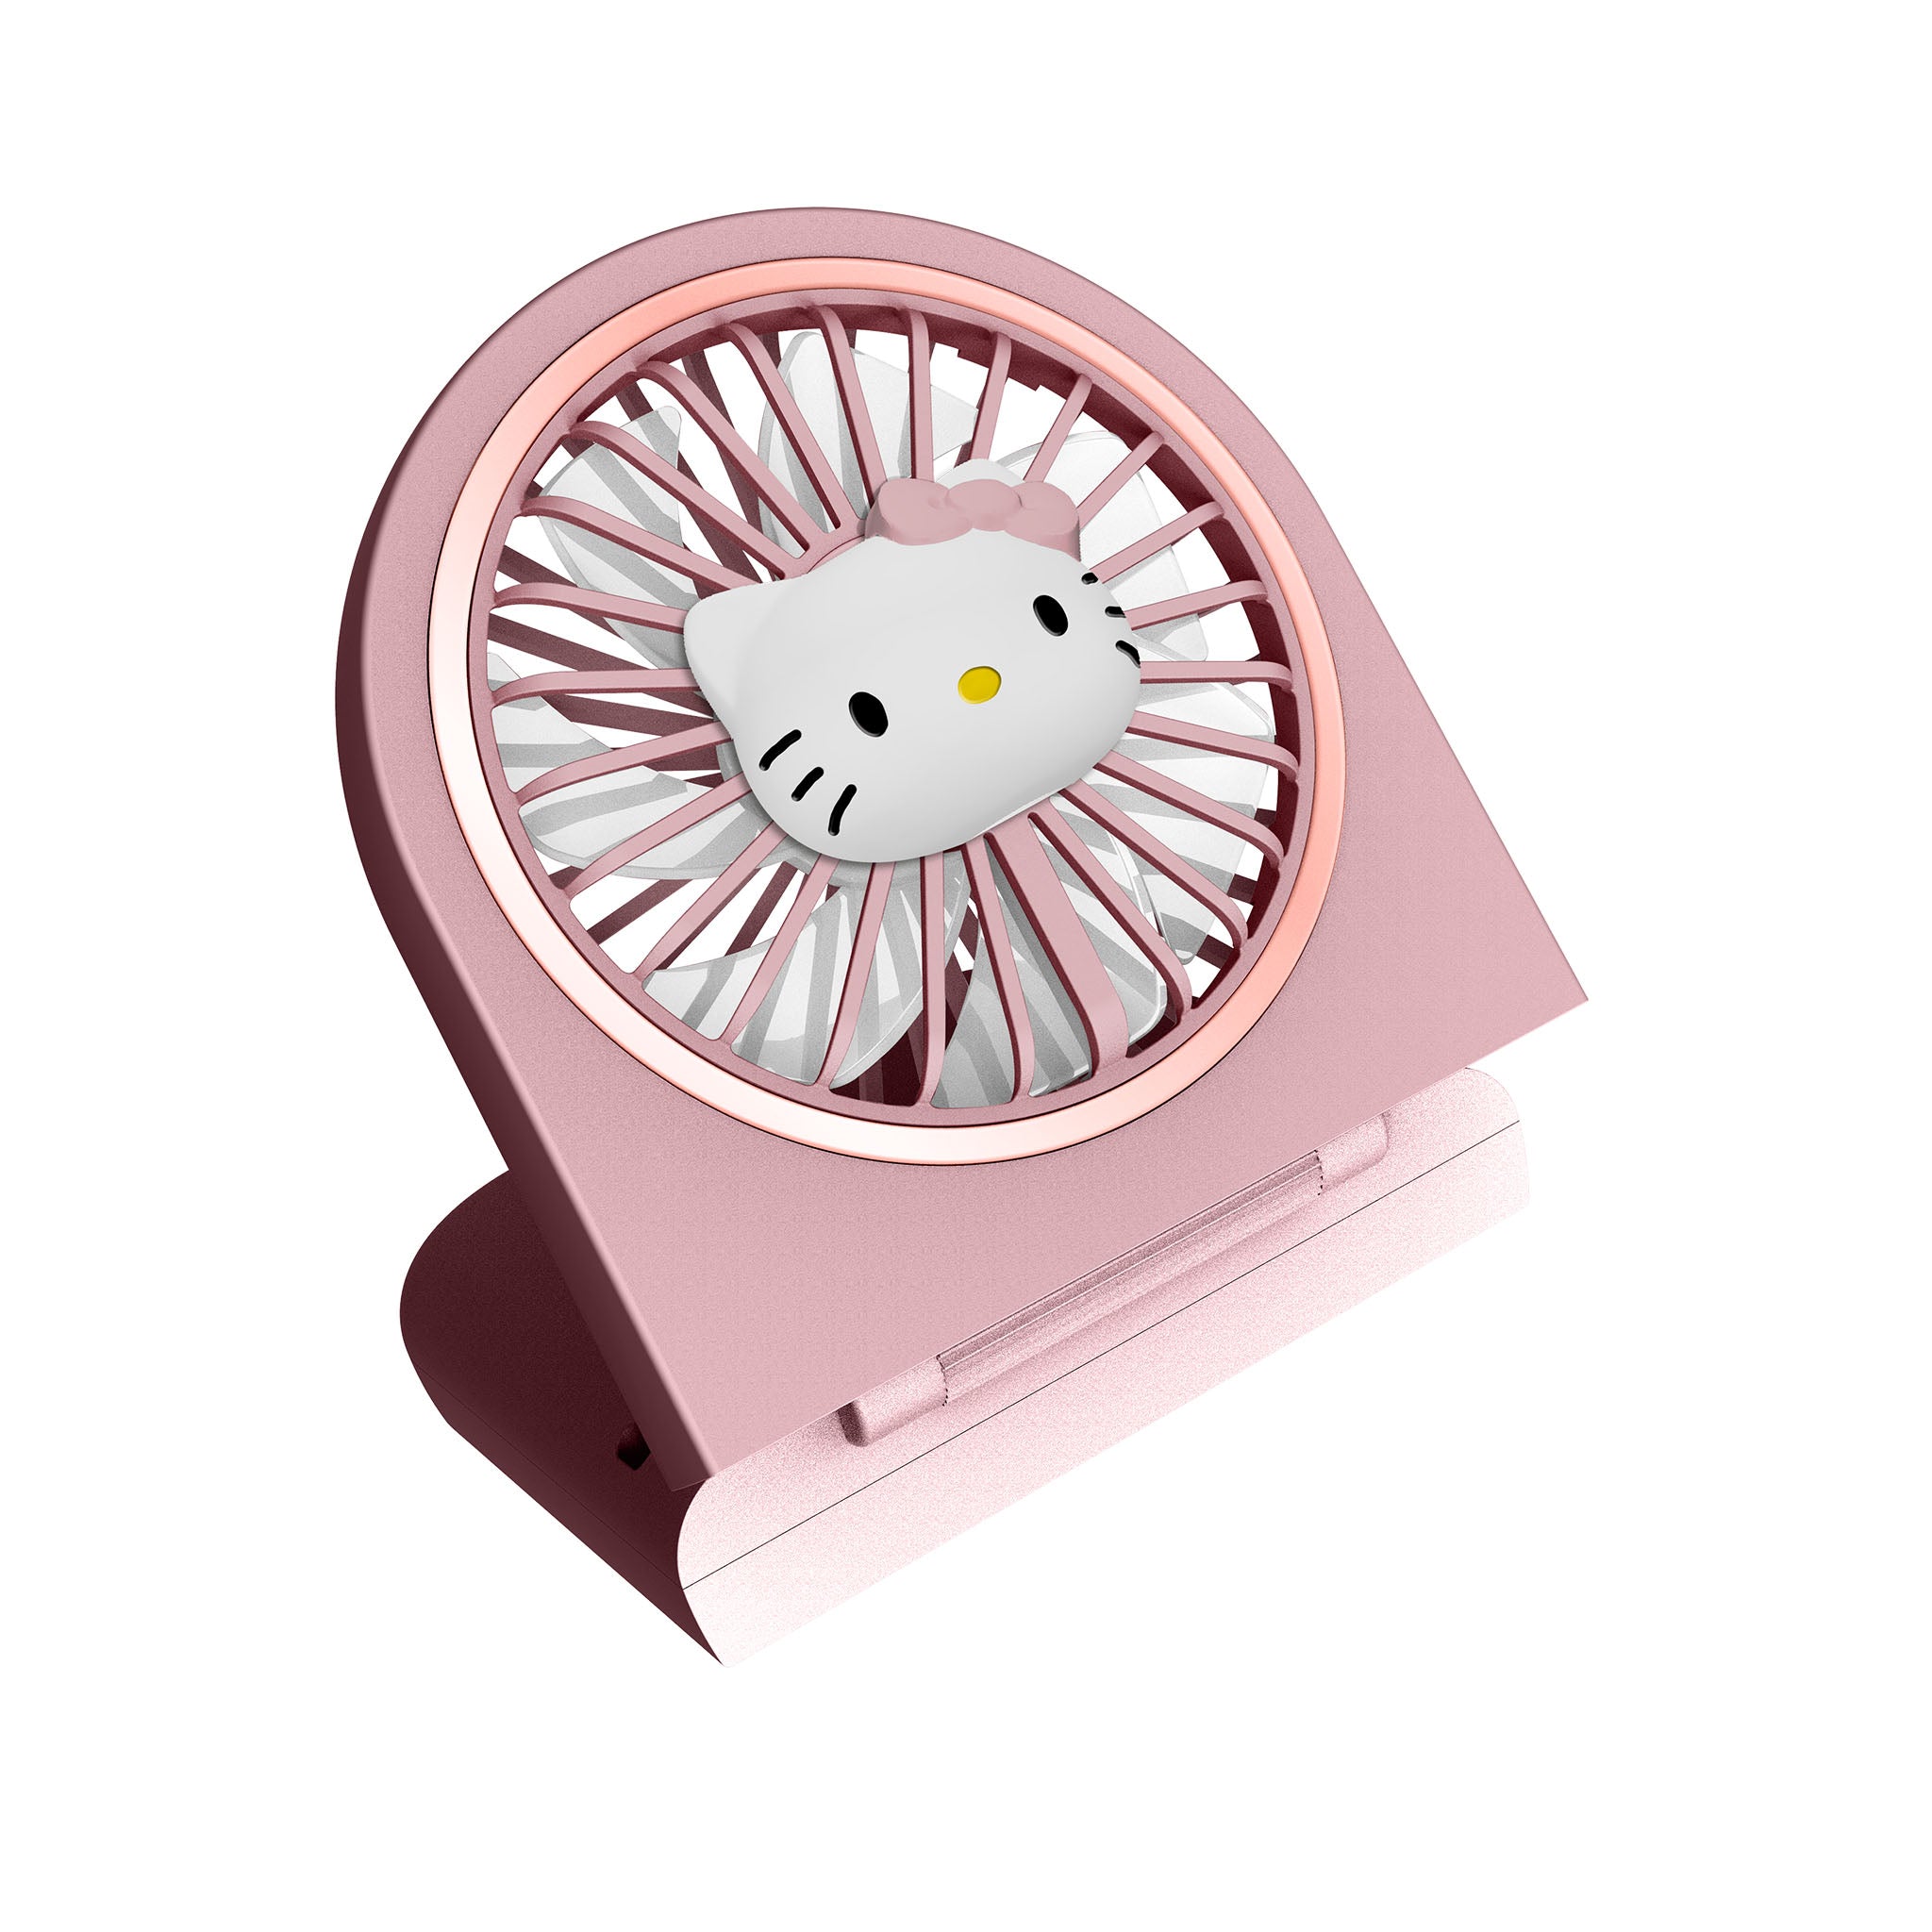 Hello Kitty Rechargeable Folding fan - soft pink/rose gold